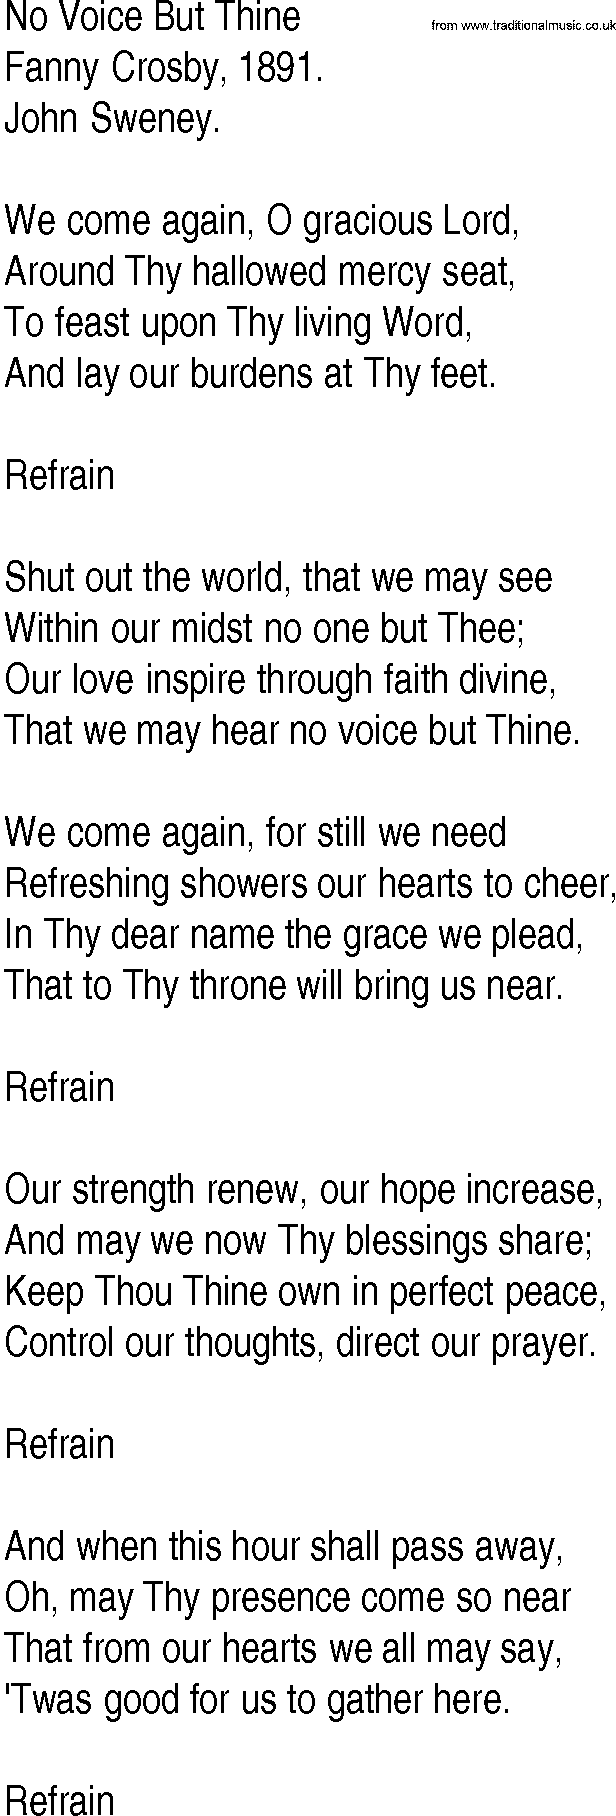 Hymn and Gospel Song: No Voice But Thine by Fanny Crosby lyrics